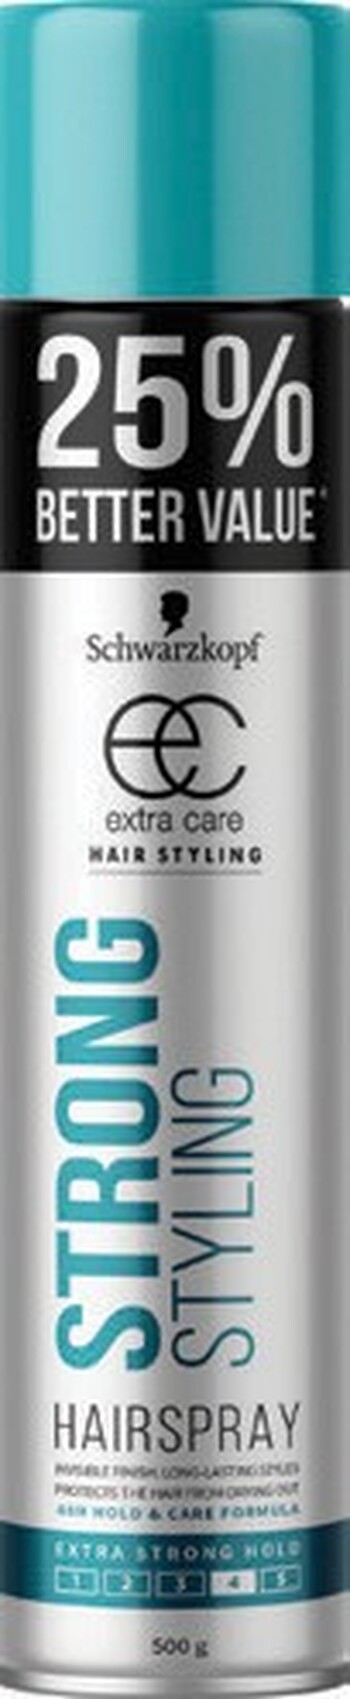 Schwarzkopf Extra Care Strong Hold Hairspray 500g